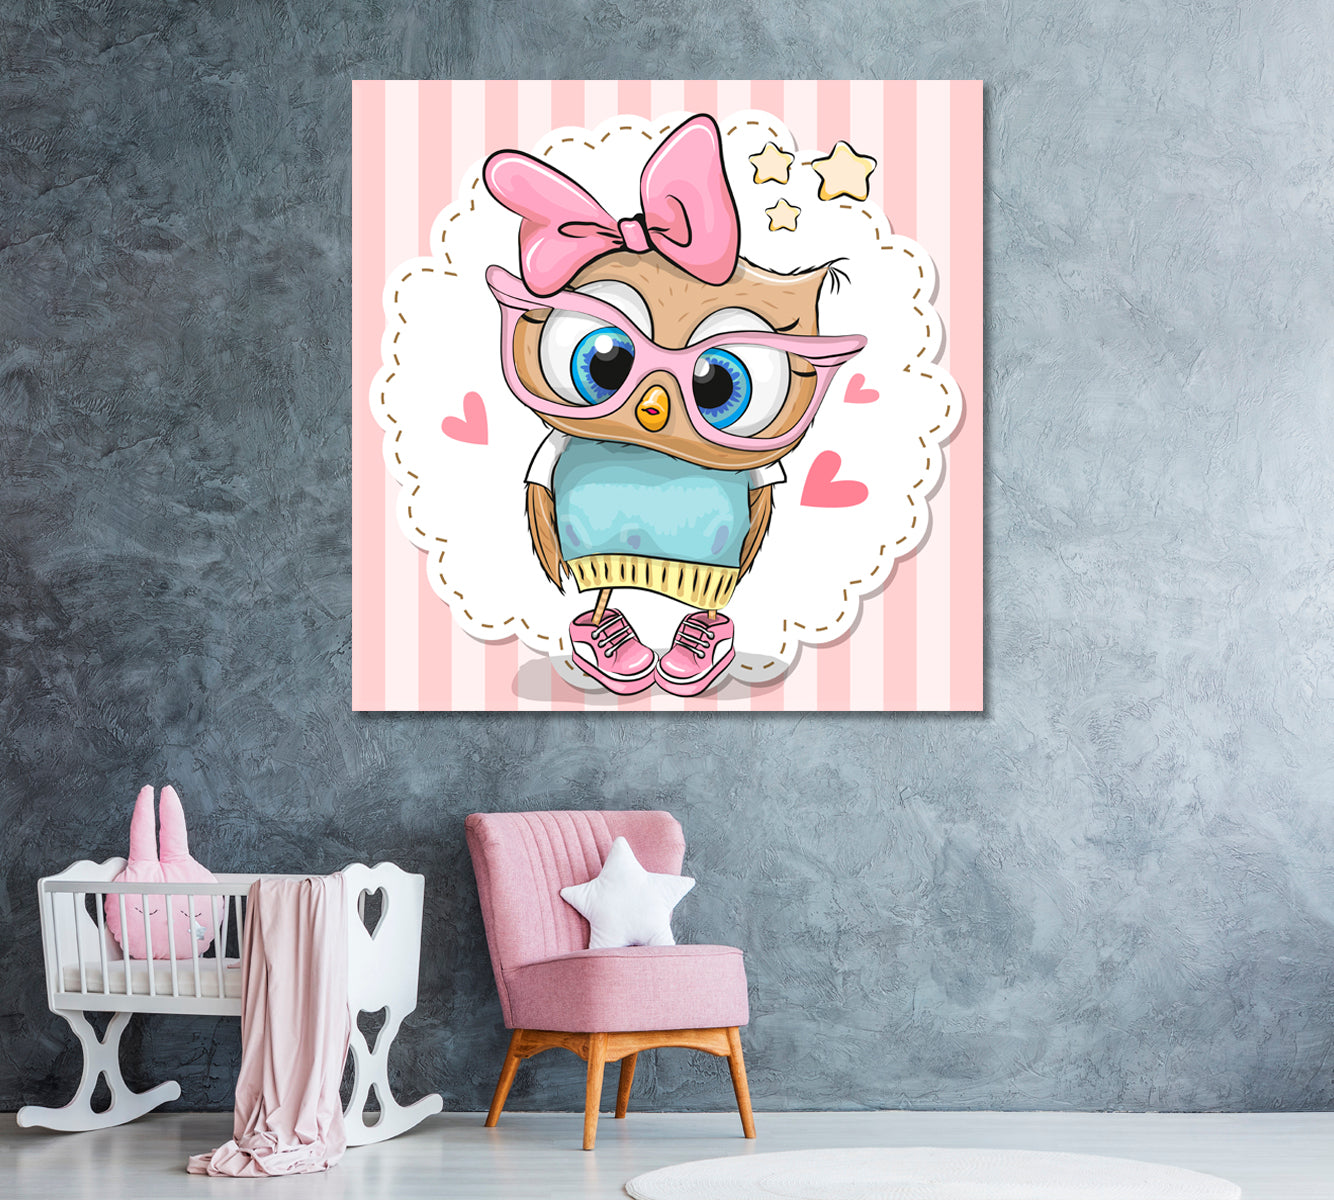 Cartoon Owl in Pink Eyeglasses Canvas Print ArtLexy 1 Panel 12"x12" inches 